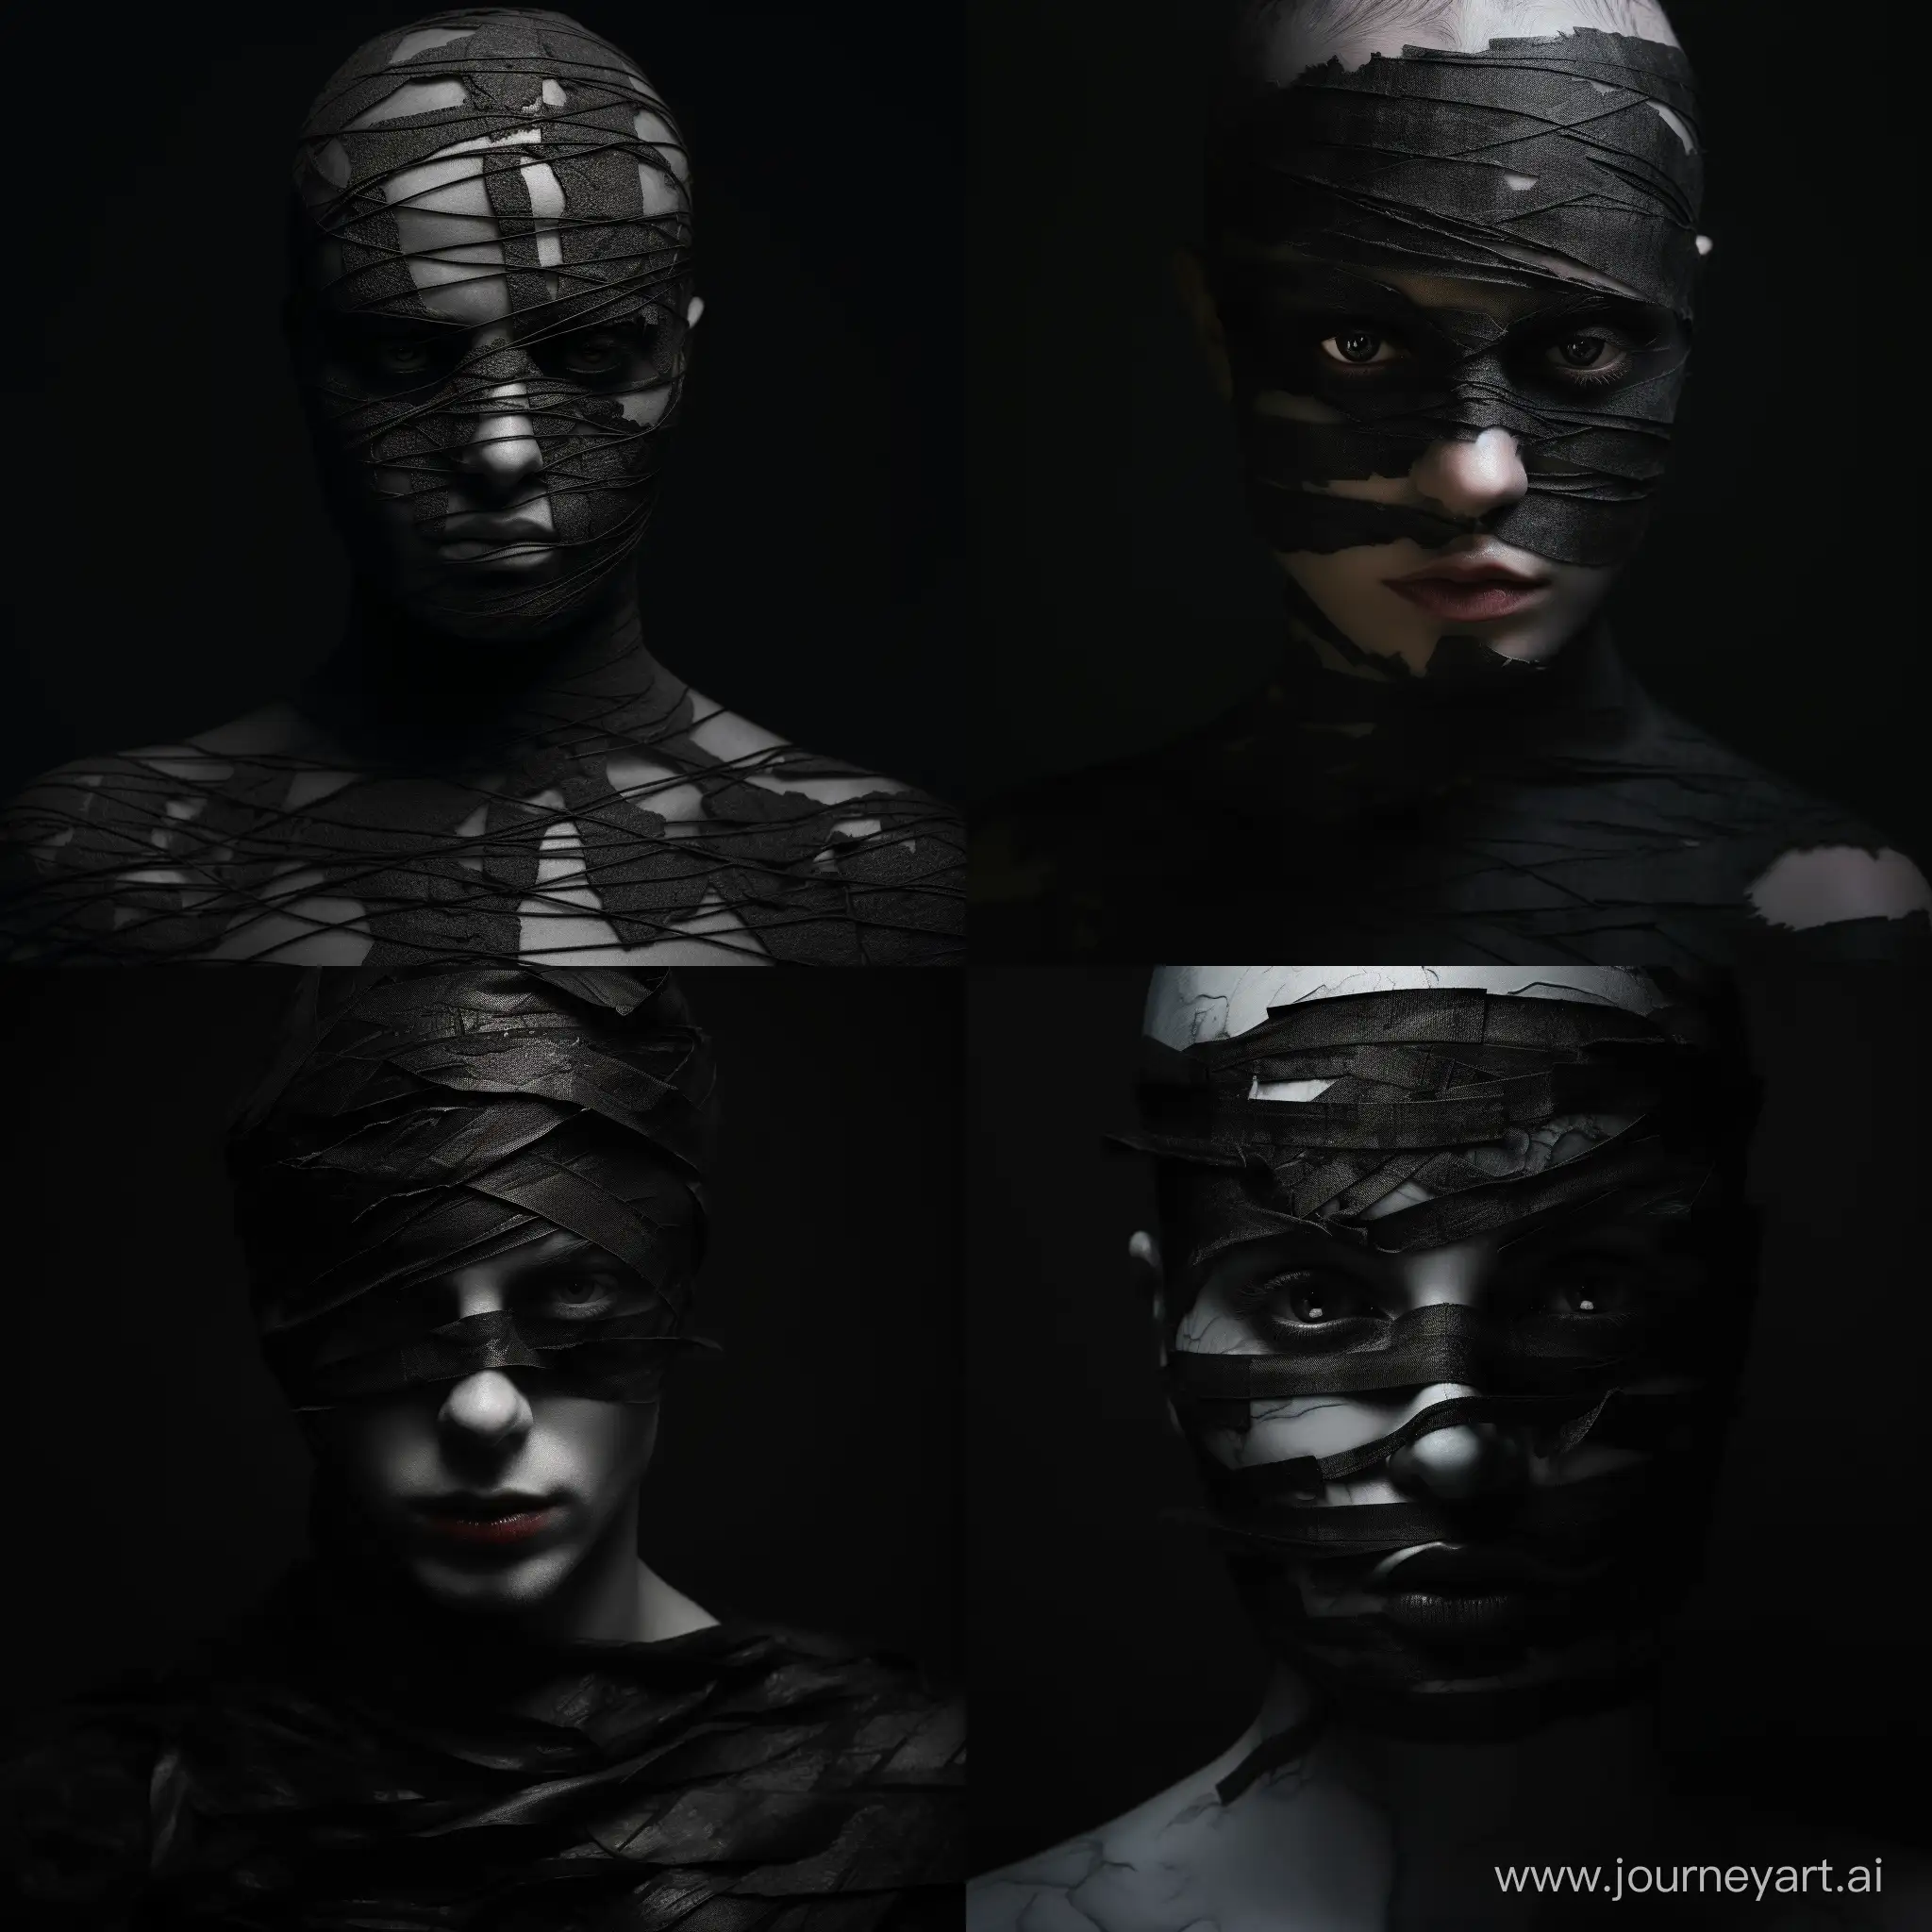 A surreal male character image, the face entirely concealed by black bandages, creating an otherworldly and enchanting monochromatic atmosphere, 3D rendering using only black textures
